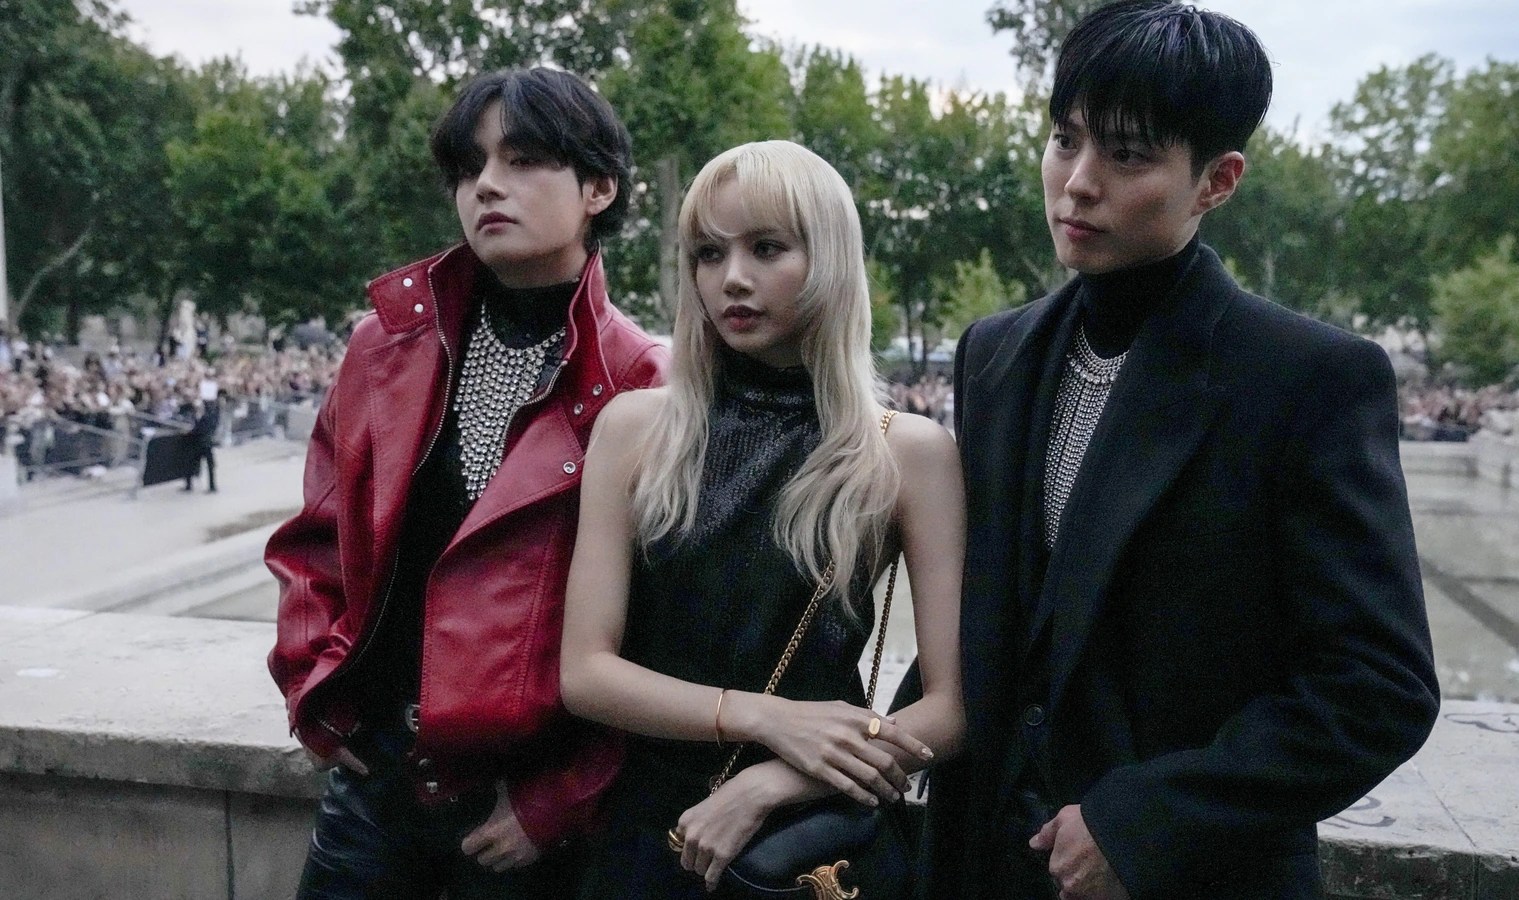 BTS' V brings chic glam with BLACKPINK's Lisa, Park Bogum as they